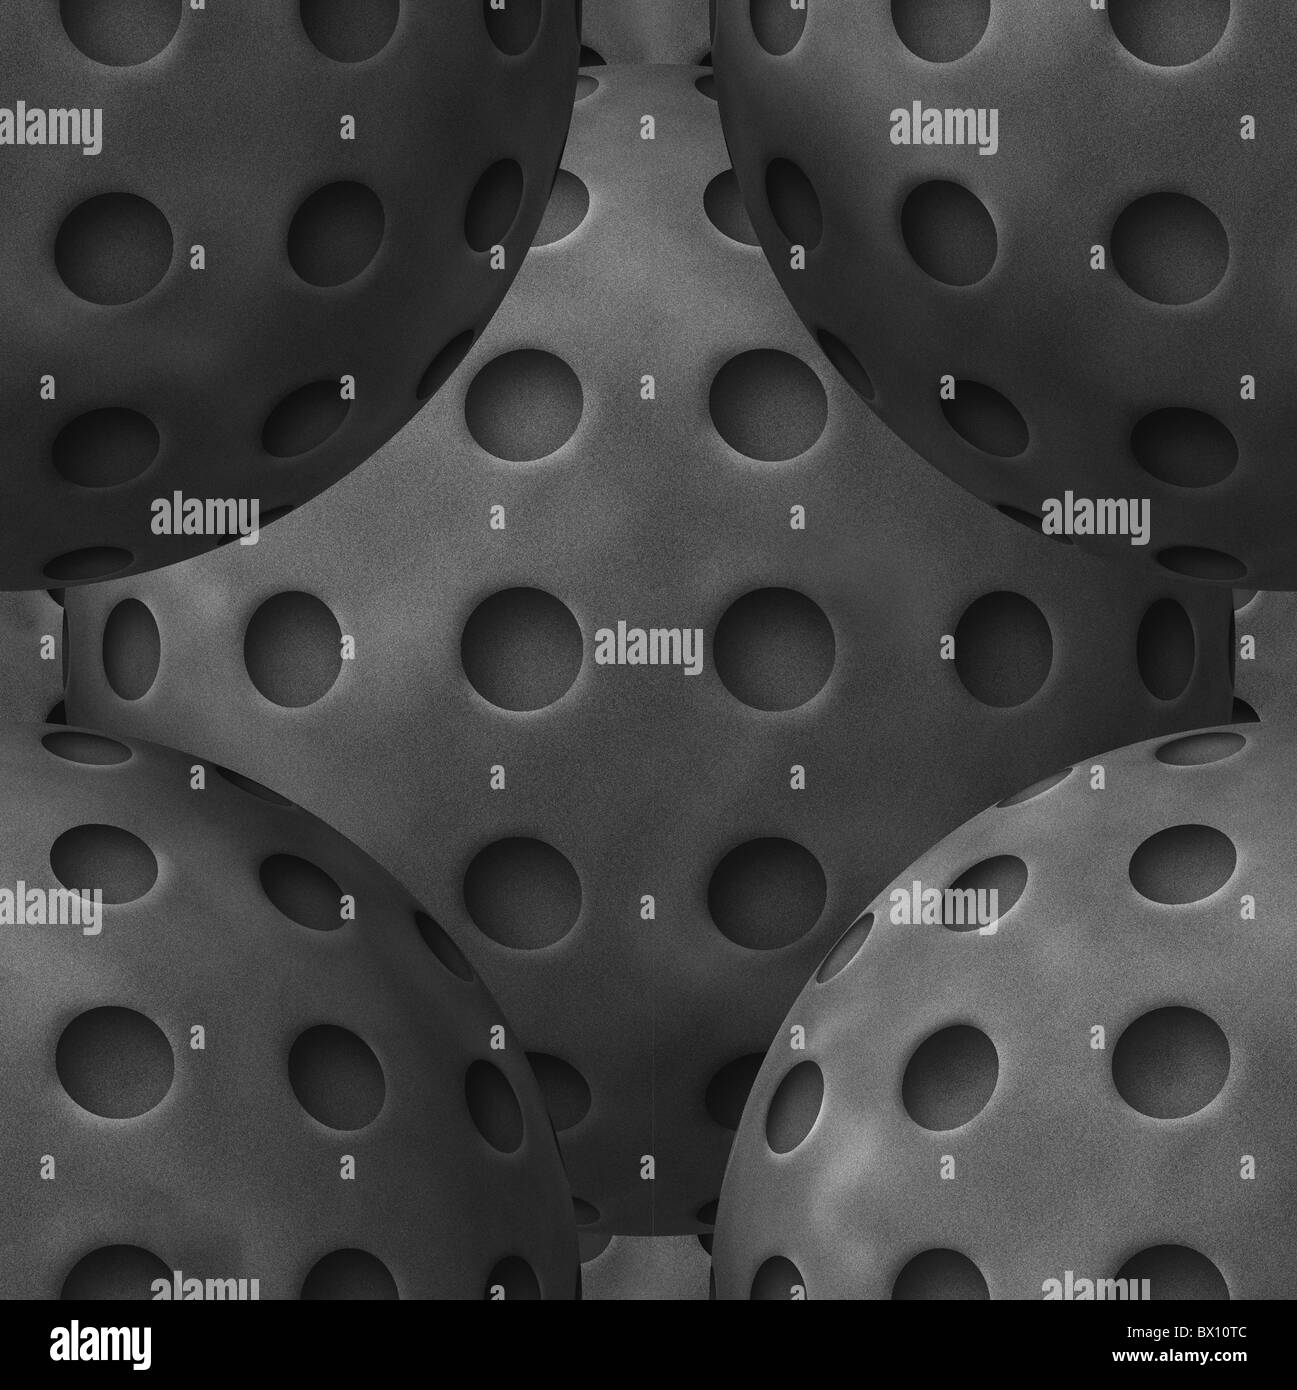 Escher-like black and white illustration of abstract metal balls with holes. Structures resemble iron wiffle balls. Stock Photo